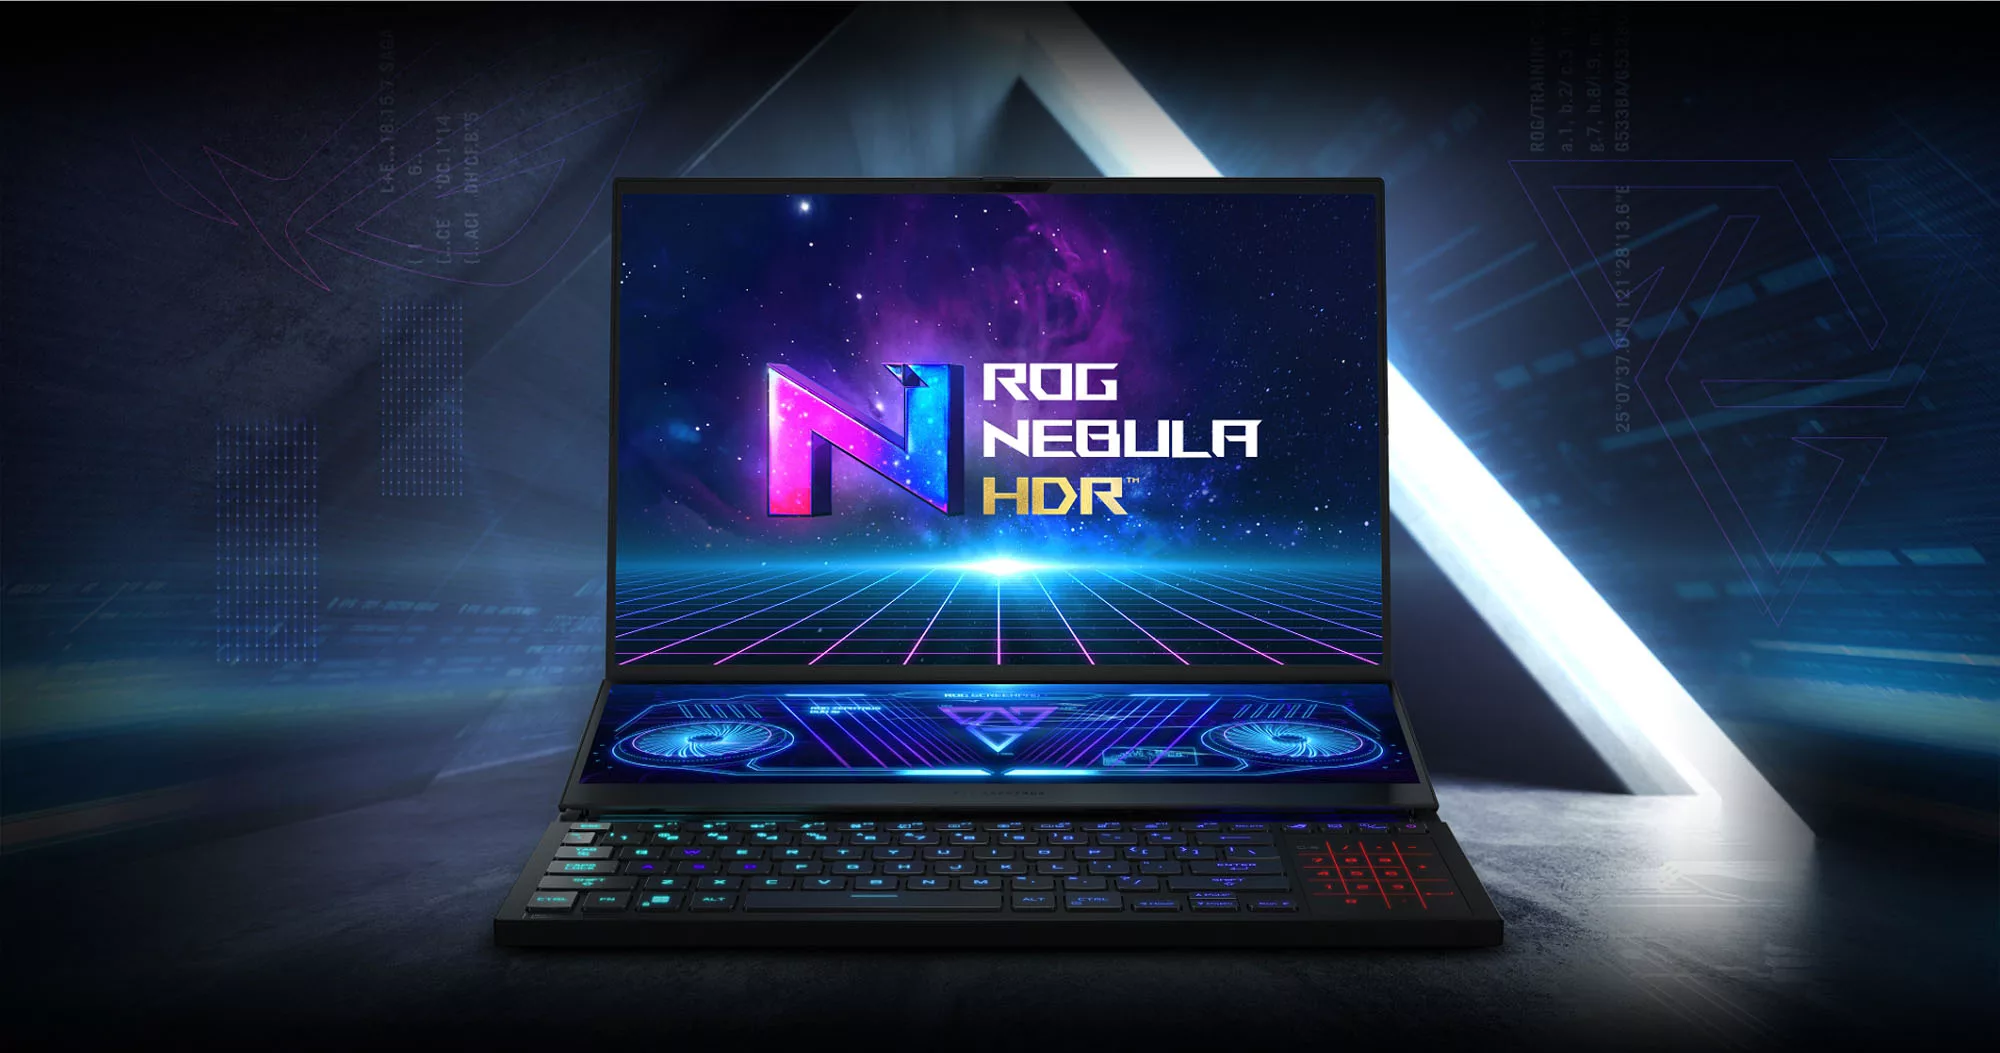 ROG solidifies its laptop display leadership with incredible Nebula HDR and Dual Spec panels | ROG - Republic of Gamers Global